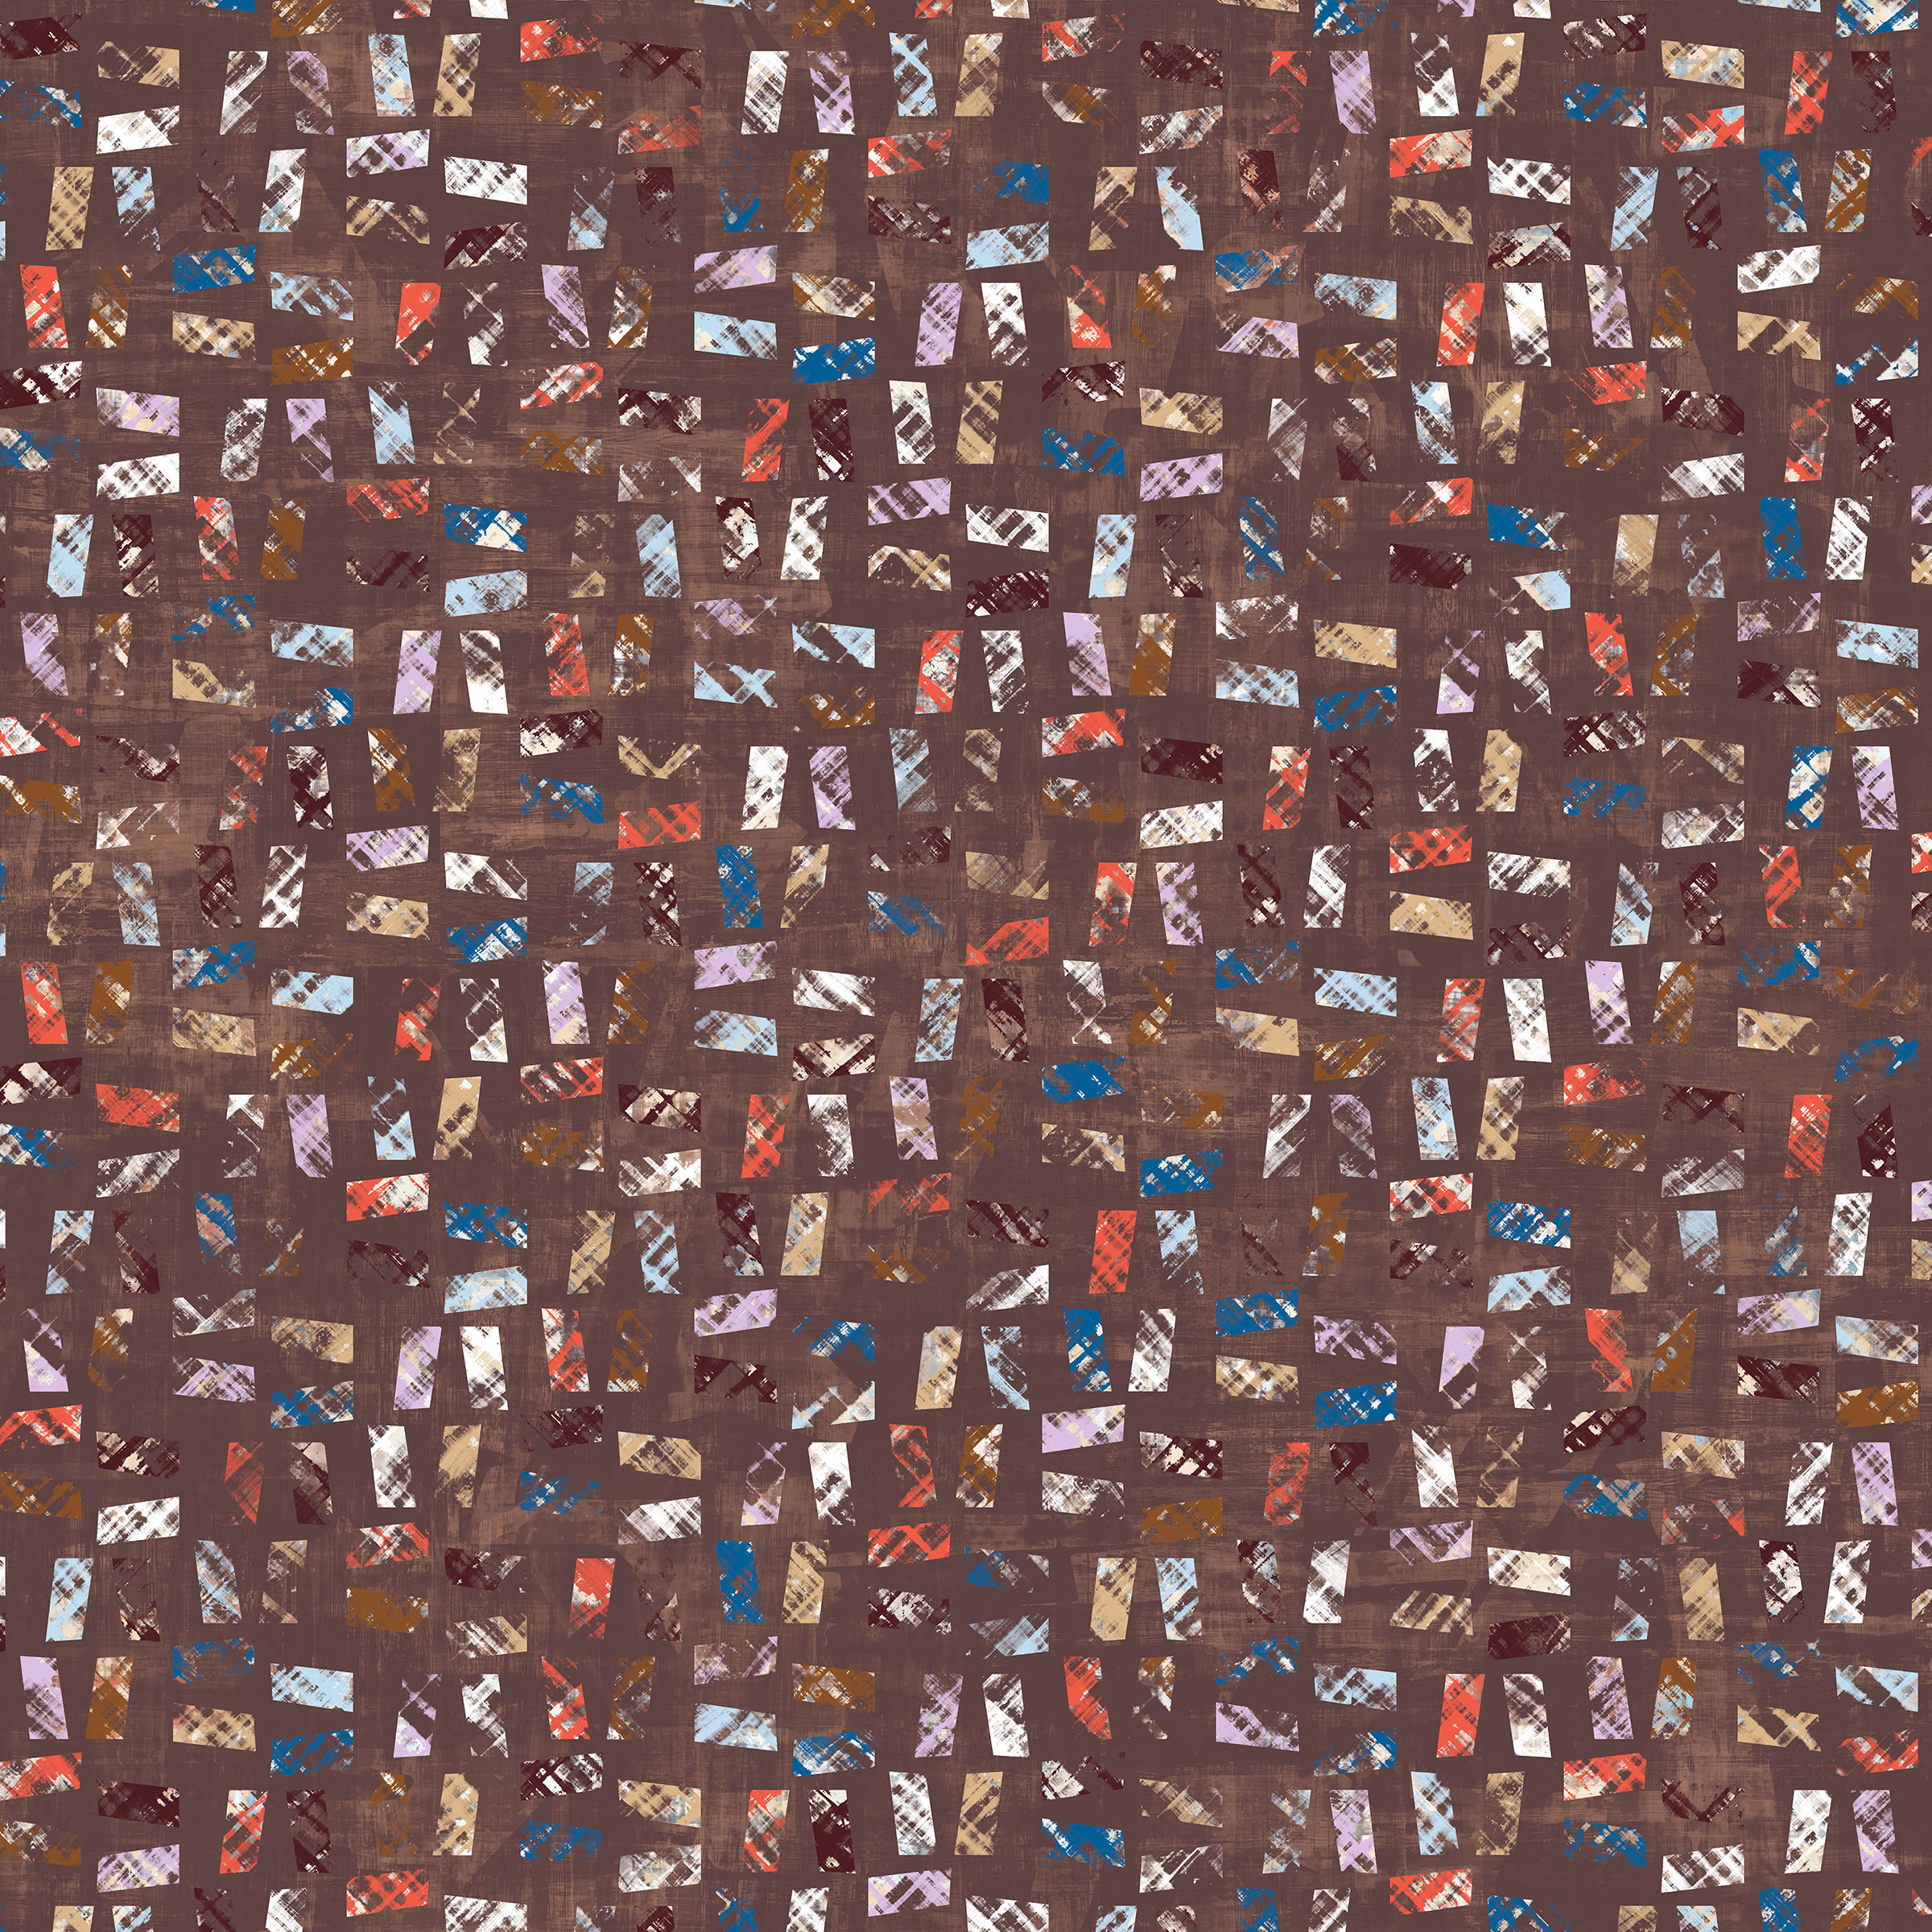 Poster, textured geometric textile design for upholstery. Dark Neutral / Brown colourway.